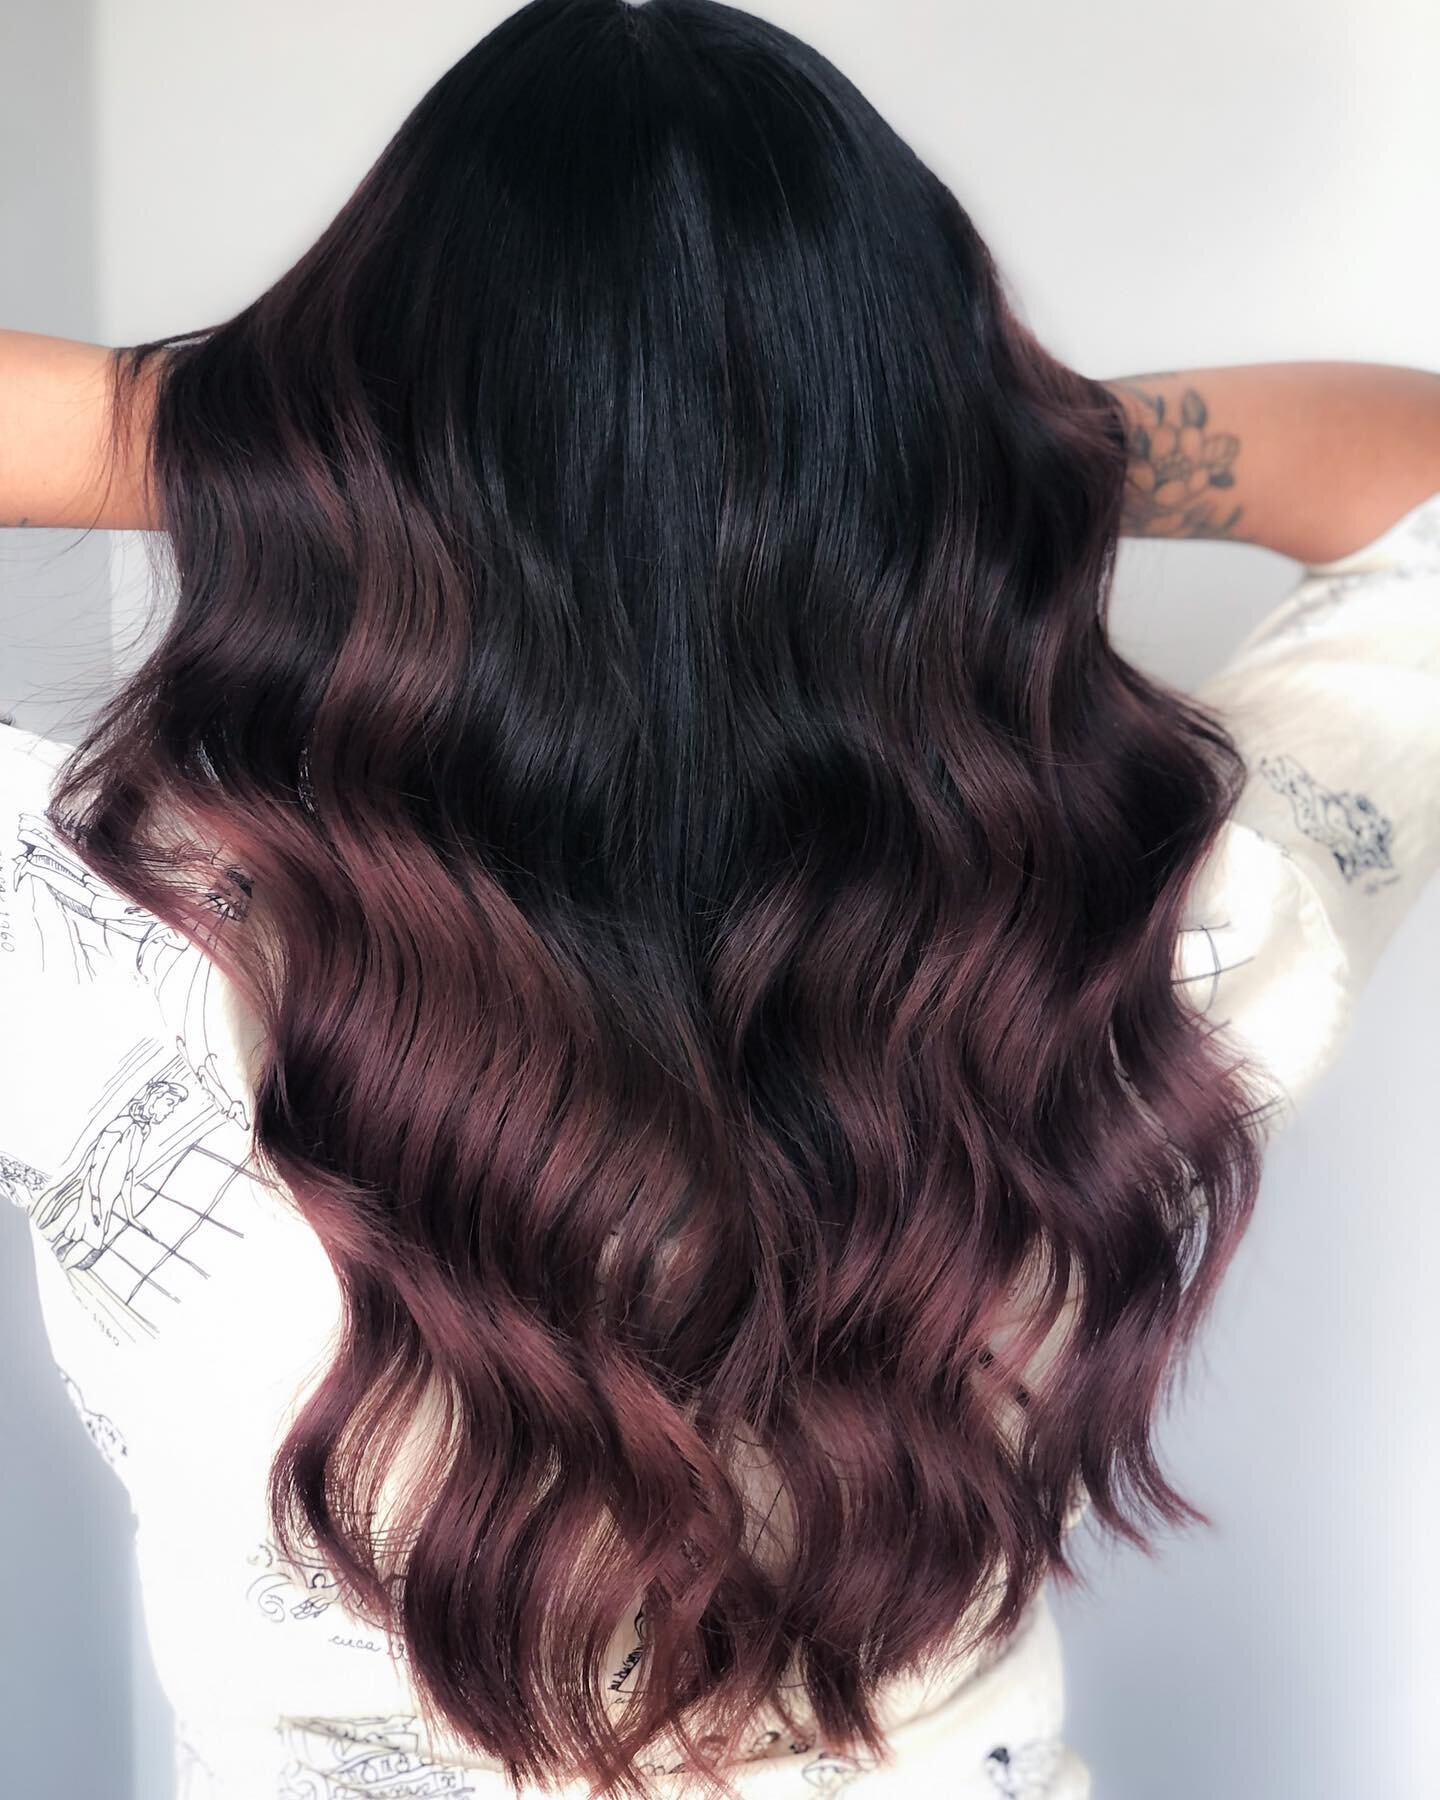 Color idea for those who want something very low maintenance.

An ombr&eacute; or sombre is a great way to add interest to your hair while keeping your natural base. It blends seamlessly into your natural color and your hair growth with not affect it